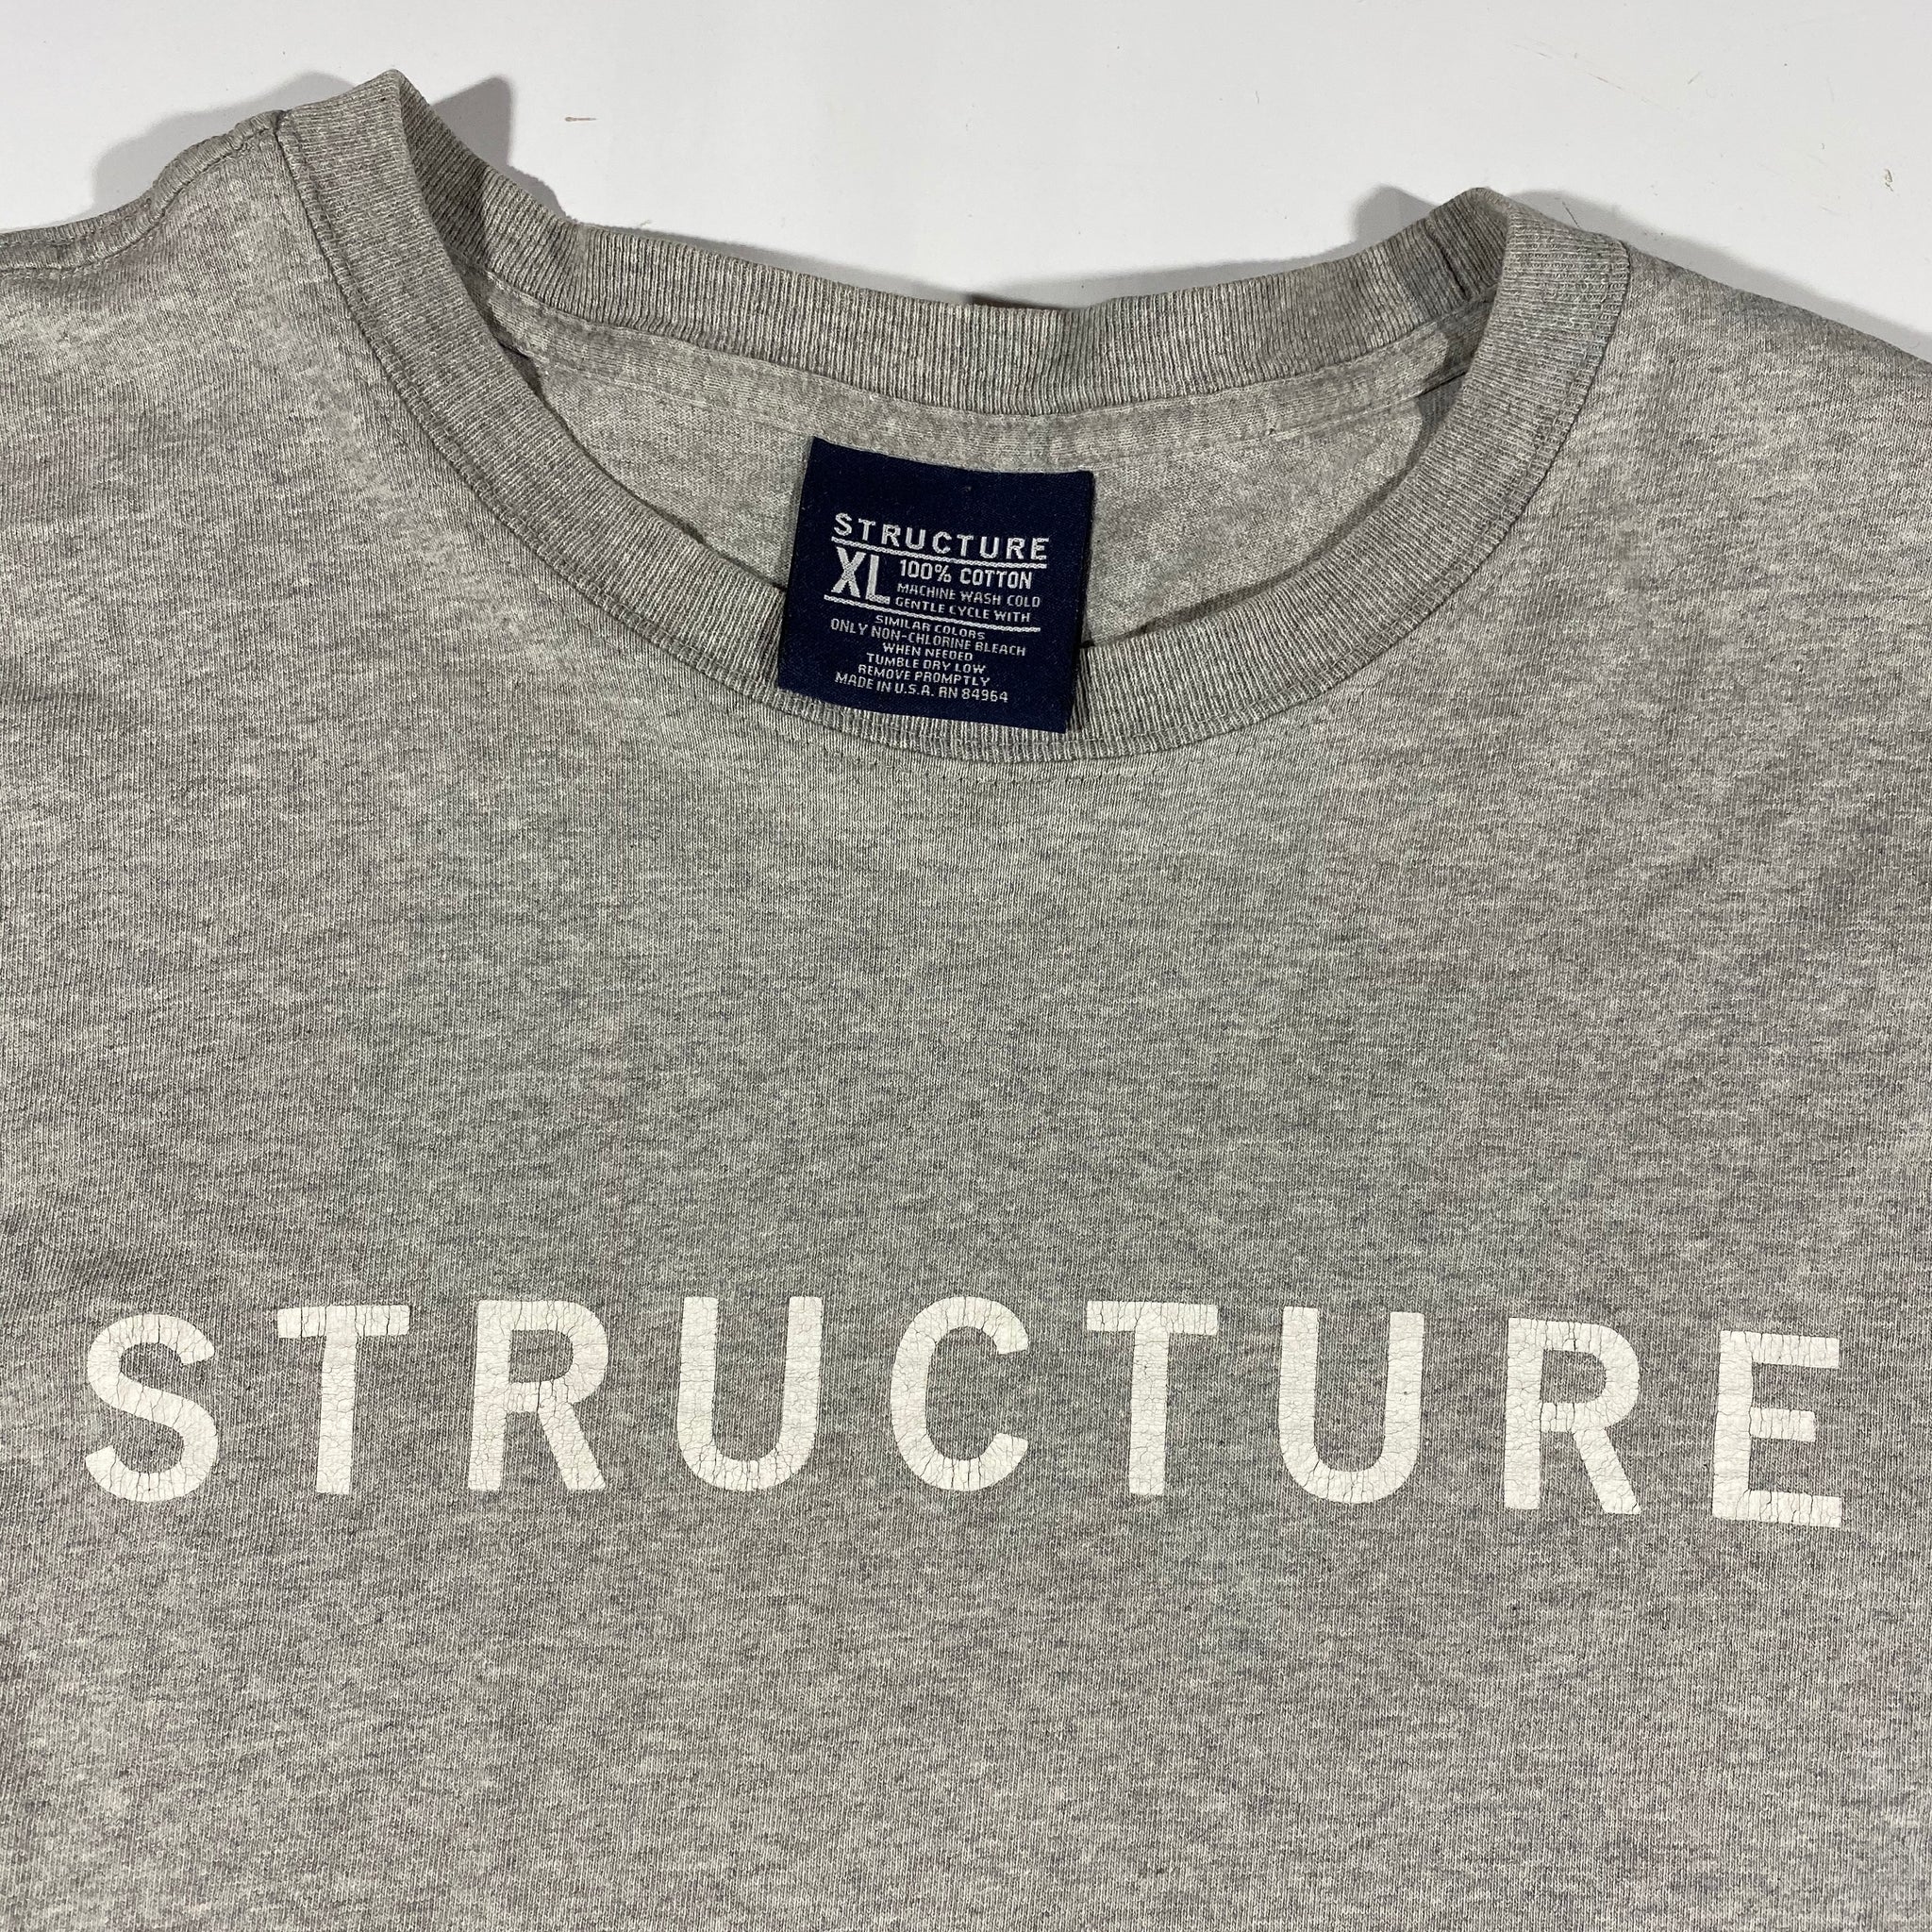 90s Structure long sleeve. Made in usa🇺🇸 XL